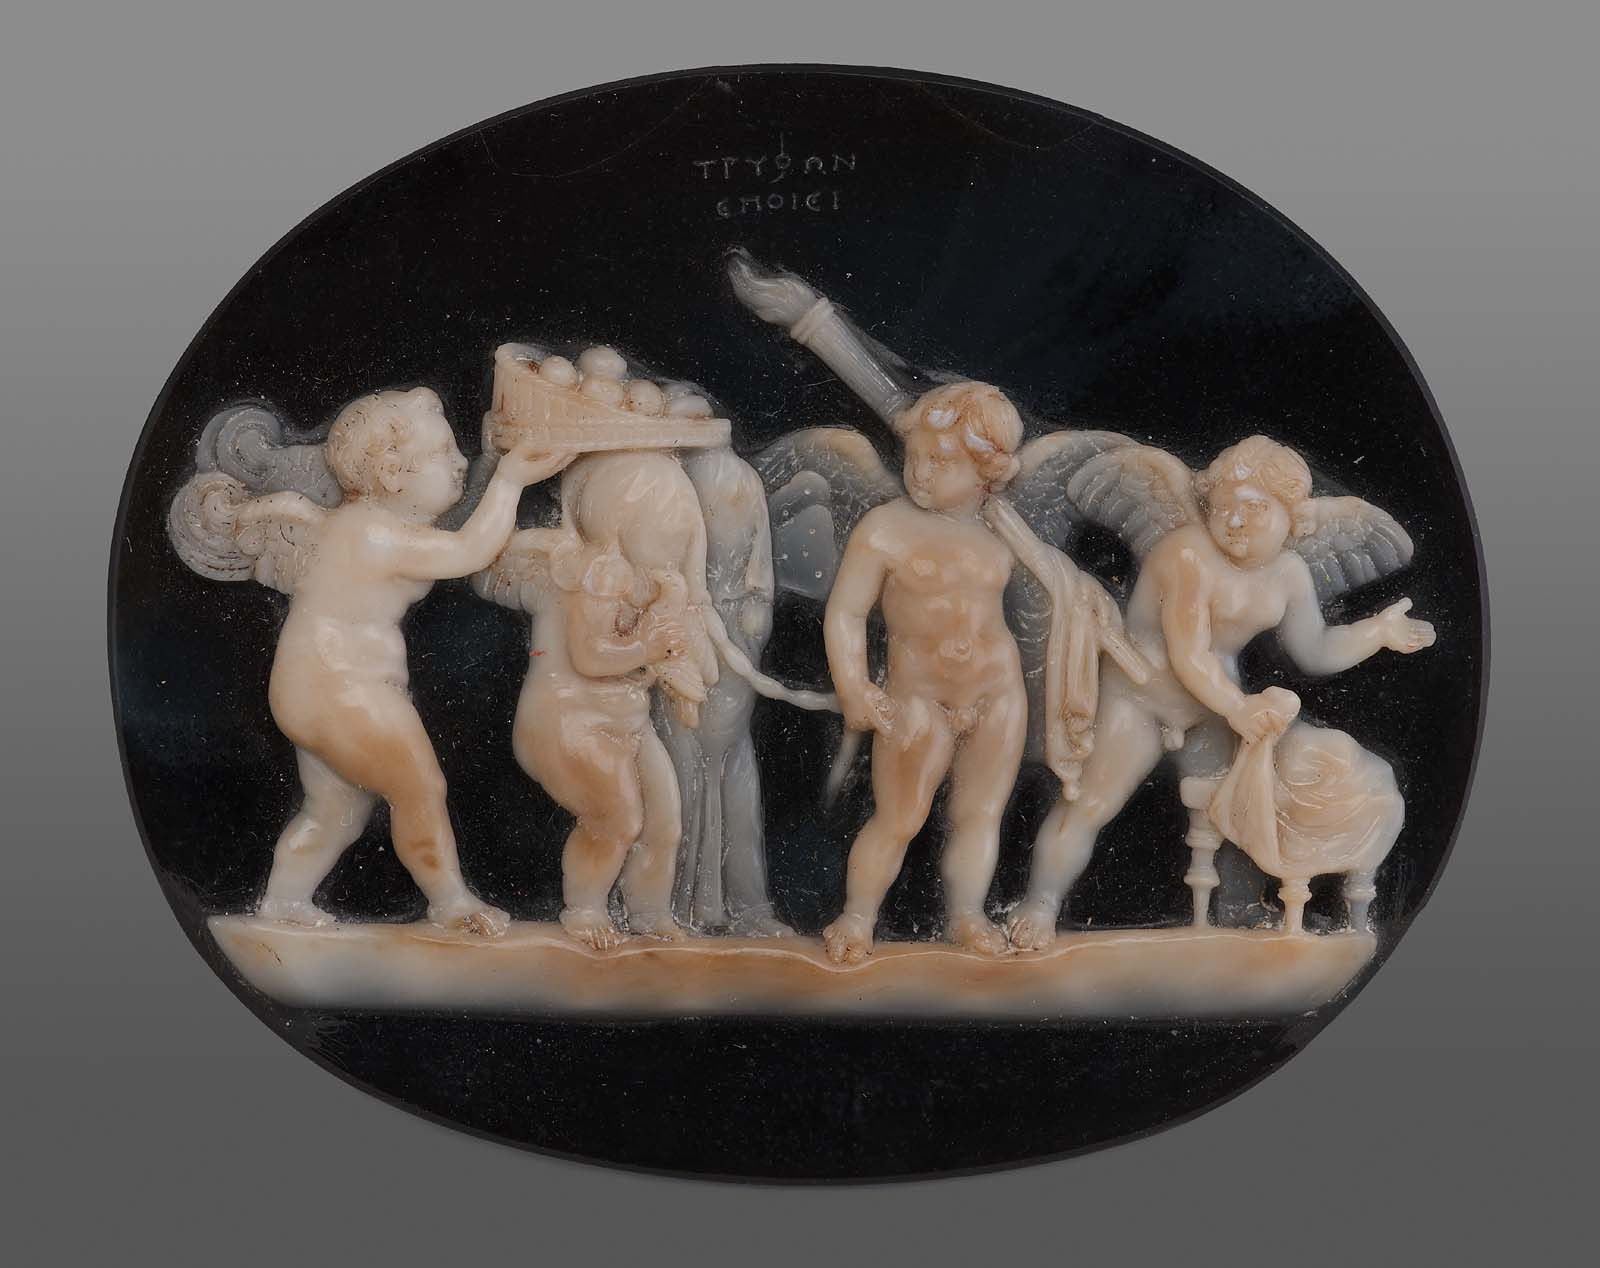 14 Fashionable Cameo Girl Head Vases Sale 2022 free download cameo girl head vases sale of jewelry museum of fine arts boston intended for cameo with the wedding of cupid and psyche or an initiation rite